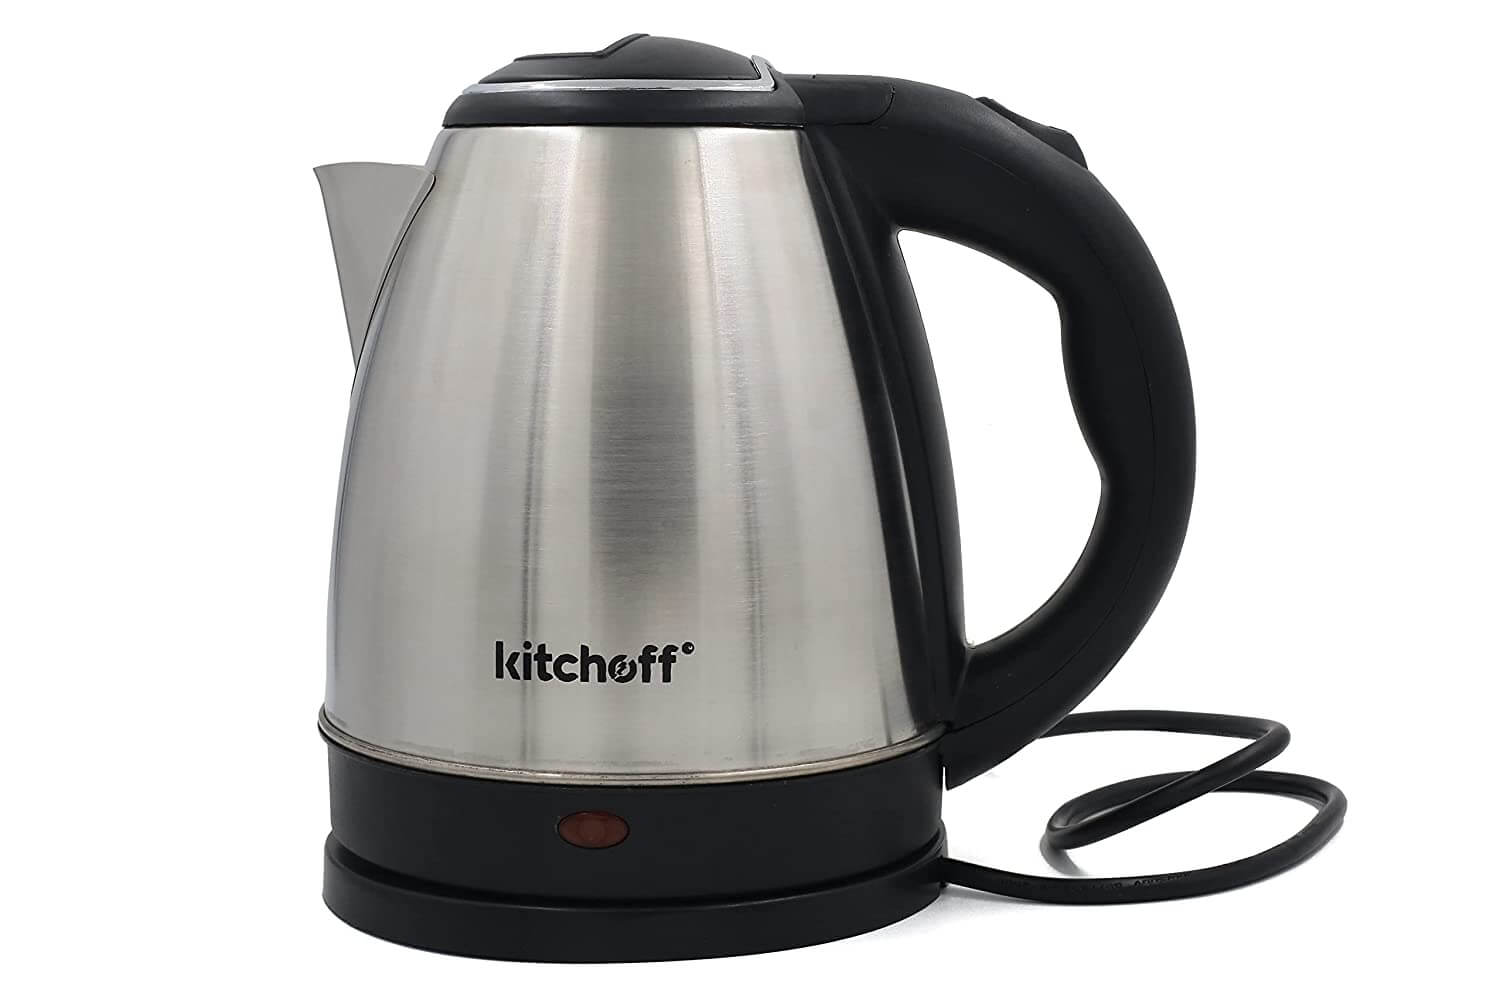 Best kitchoff electric kettle